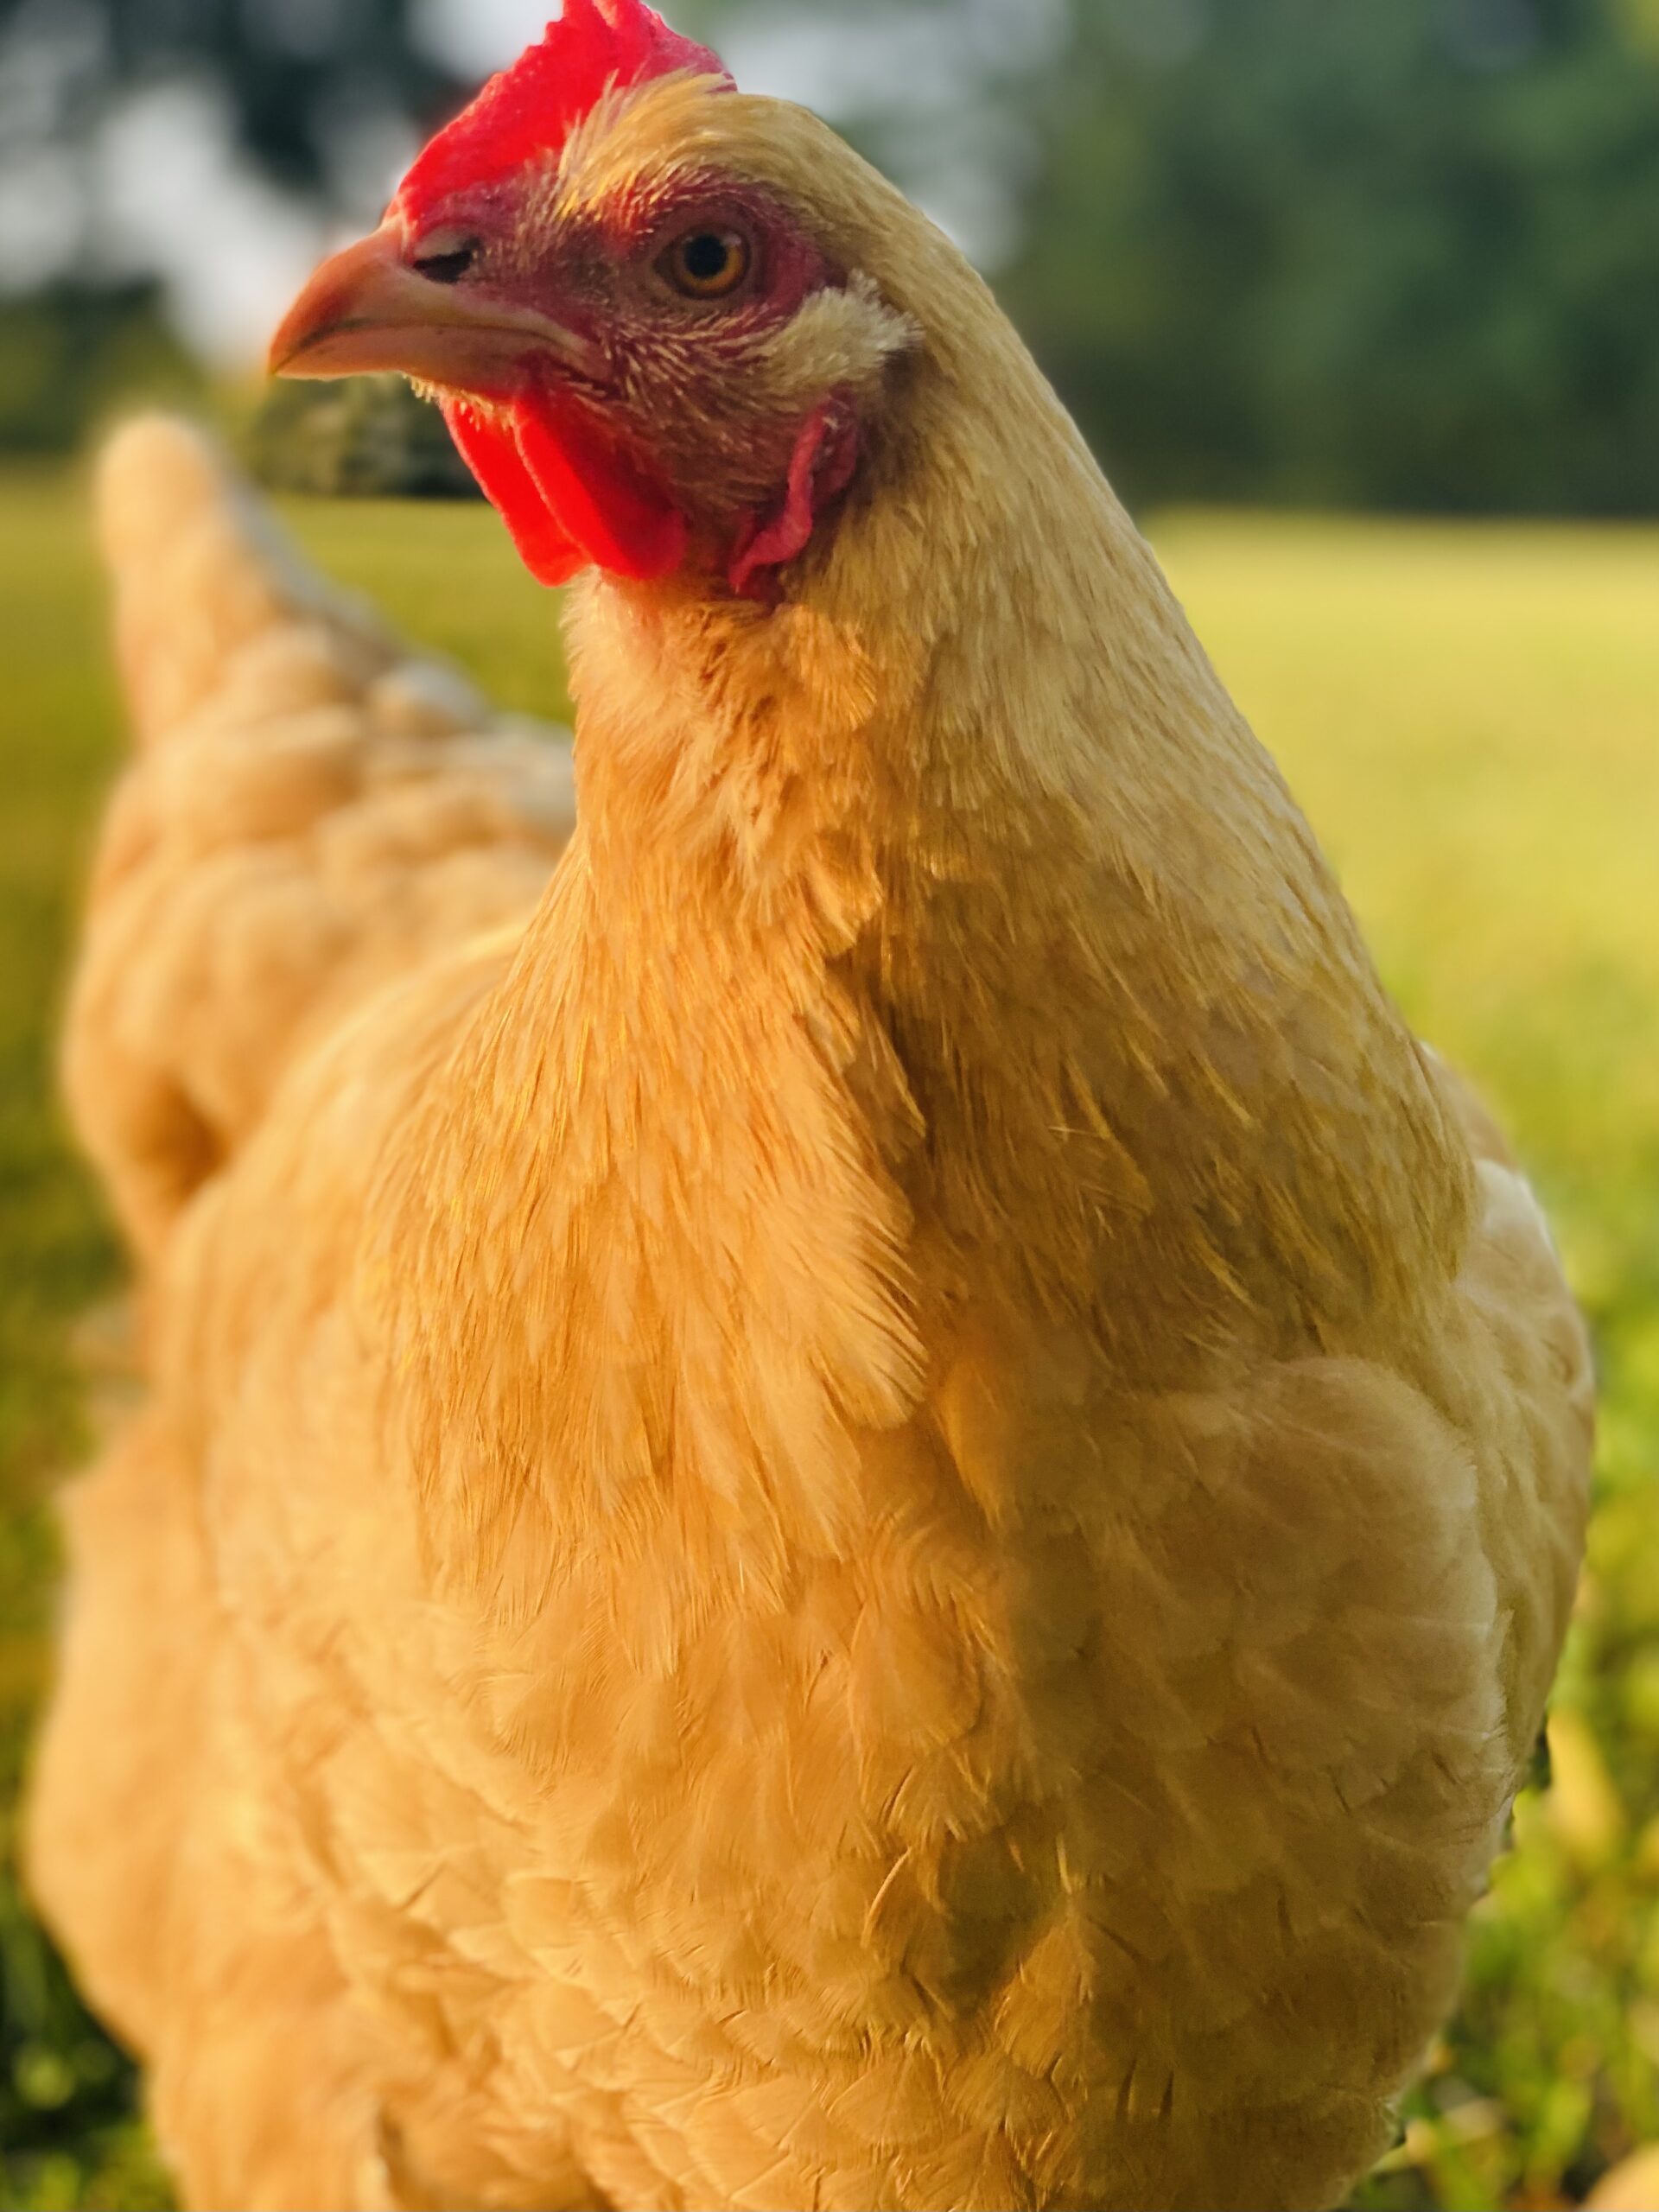 MCMURRAY HATCHERY | HERITAGE BREED ILLUSTRATIONS | DELAWARE CHICKENS